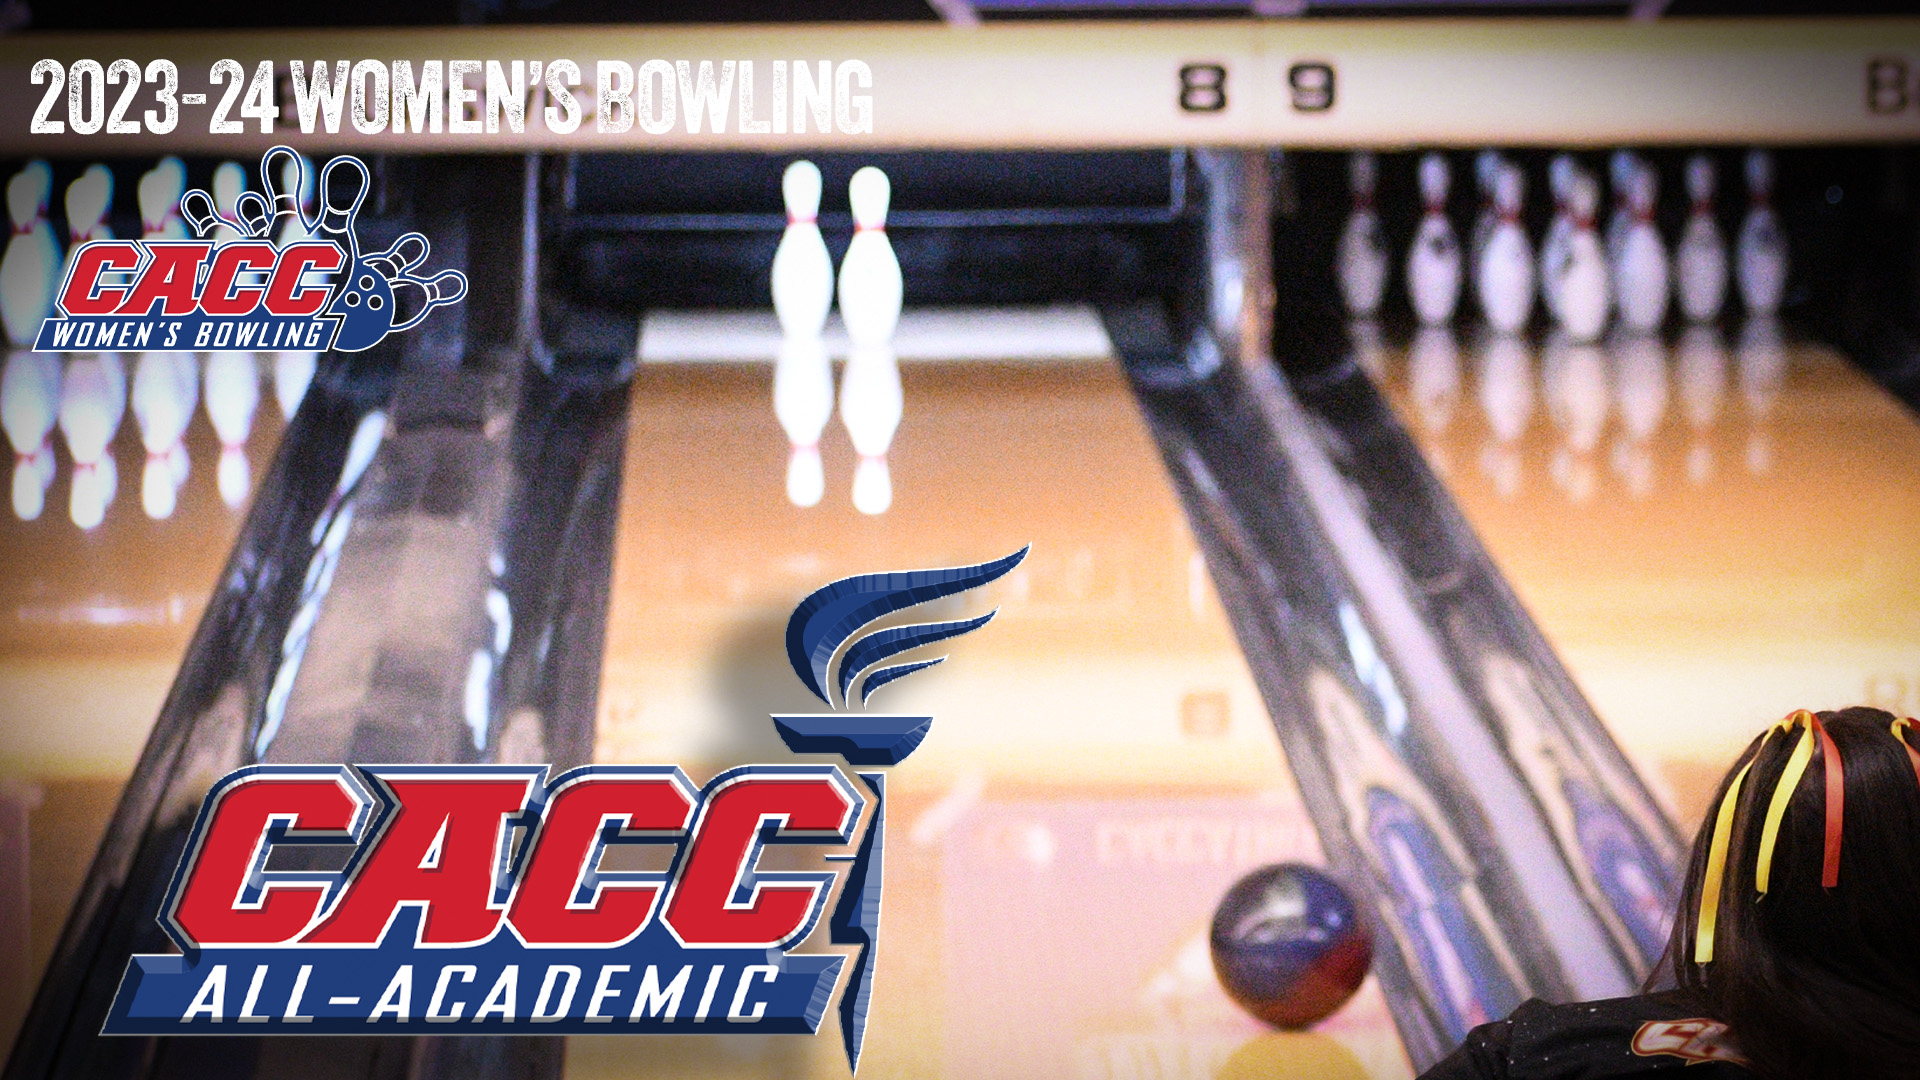 9 S-As Named to 2023-24 CACC Women's Bowling All-Academic Team